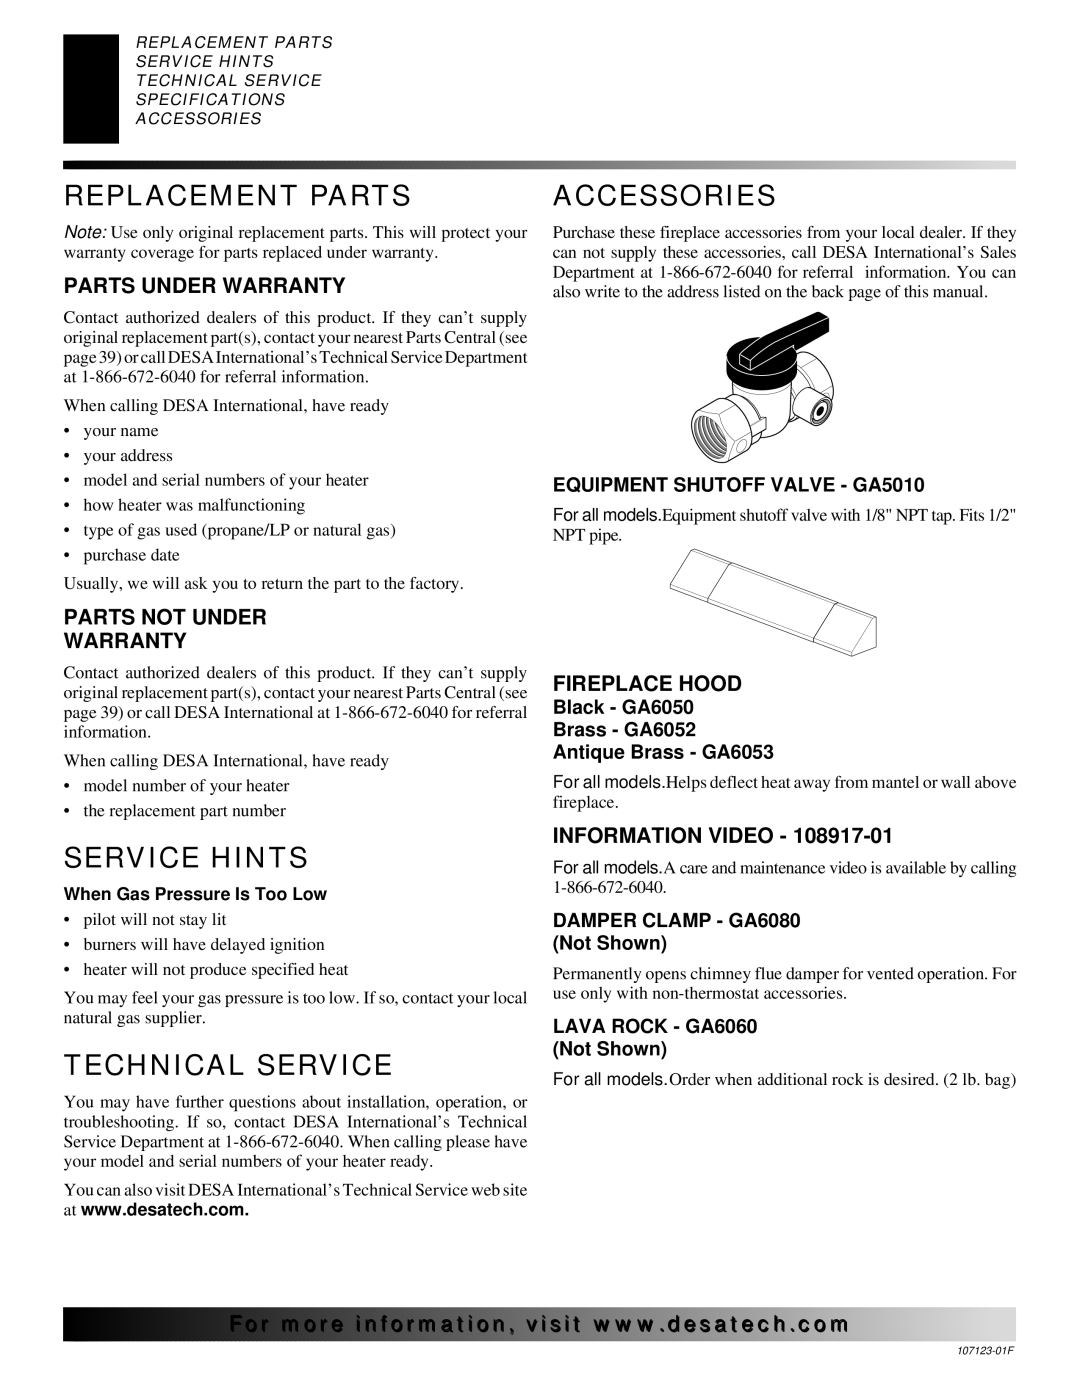 Desa installation manual Replacement Parts, Service Hints, Technical Service, Accessories 